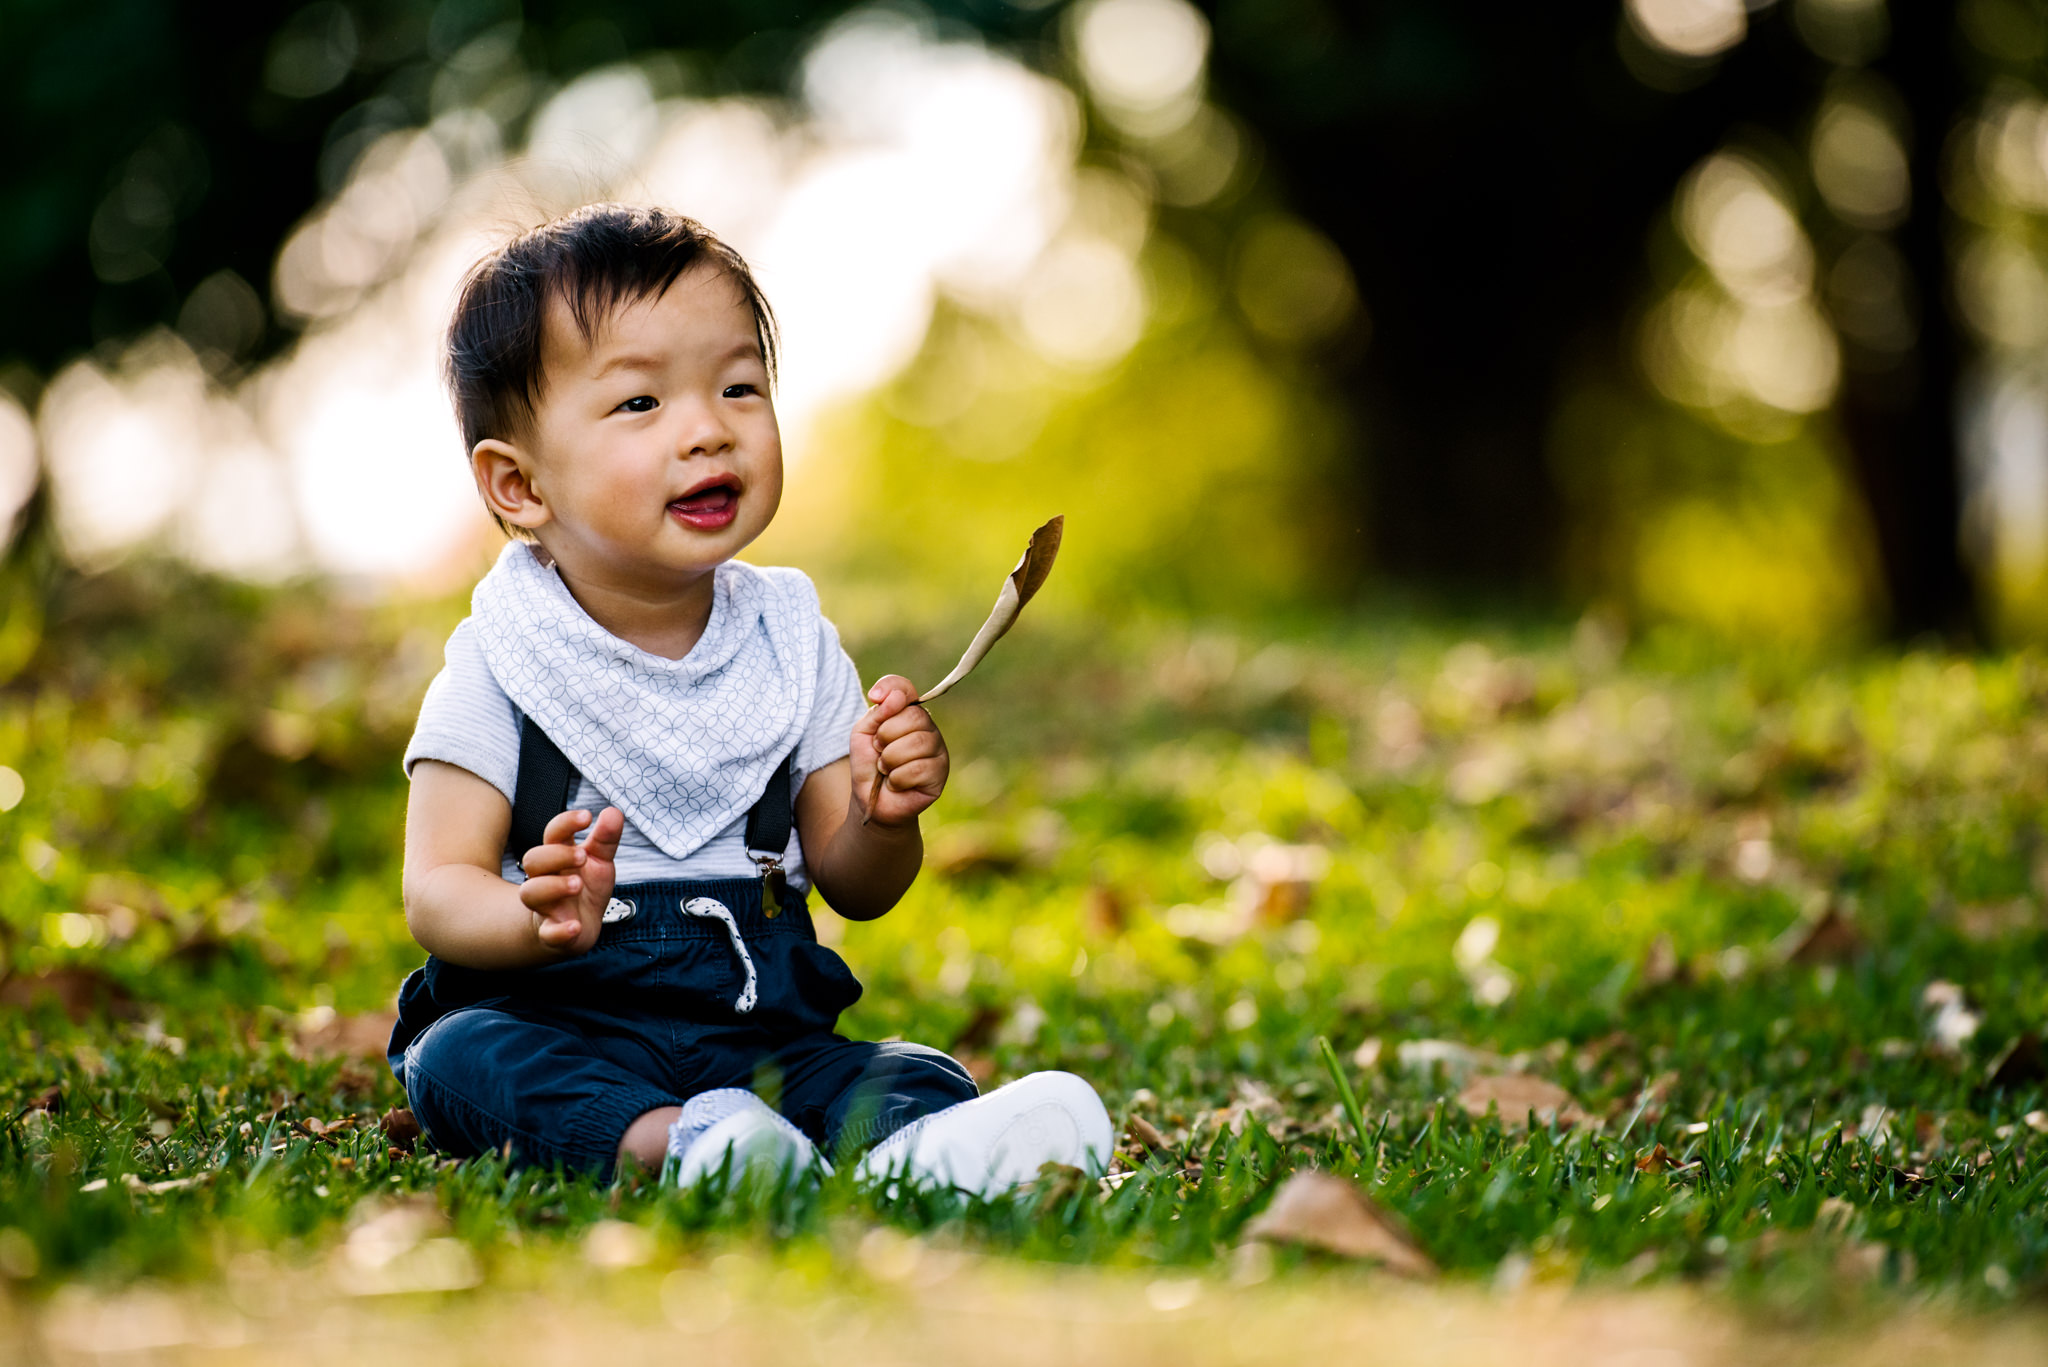 Cute baby smiling in park